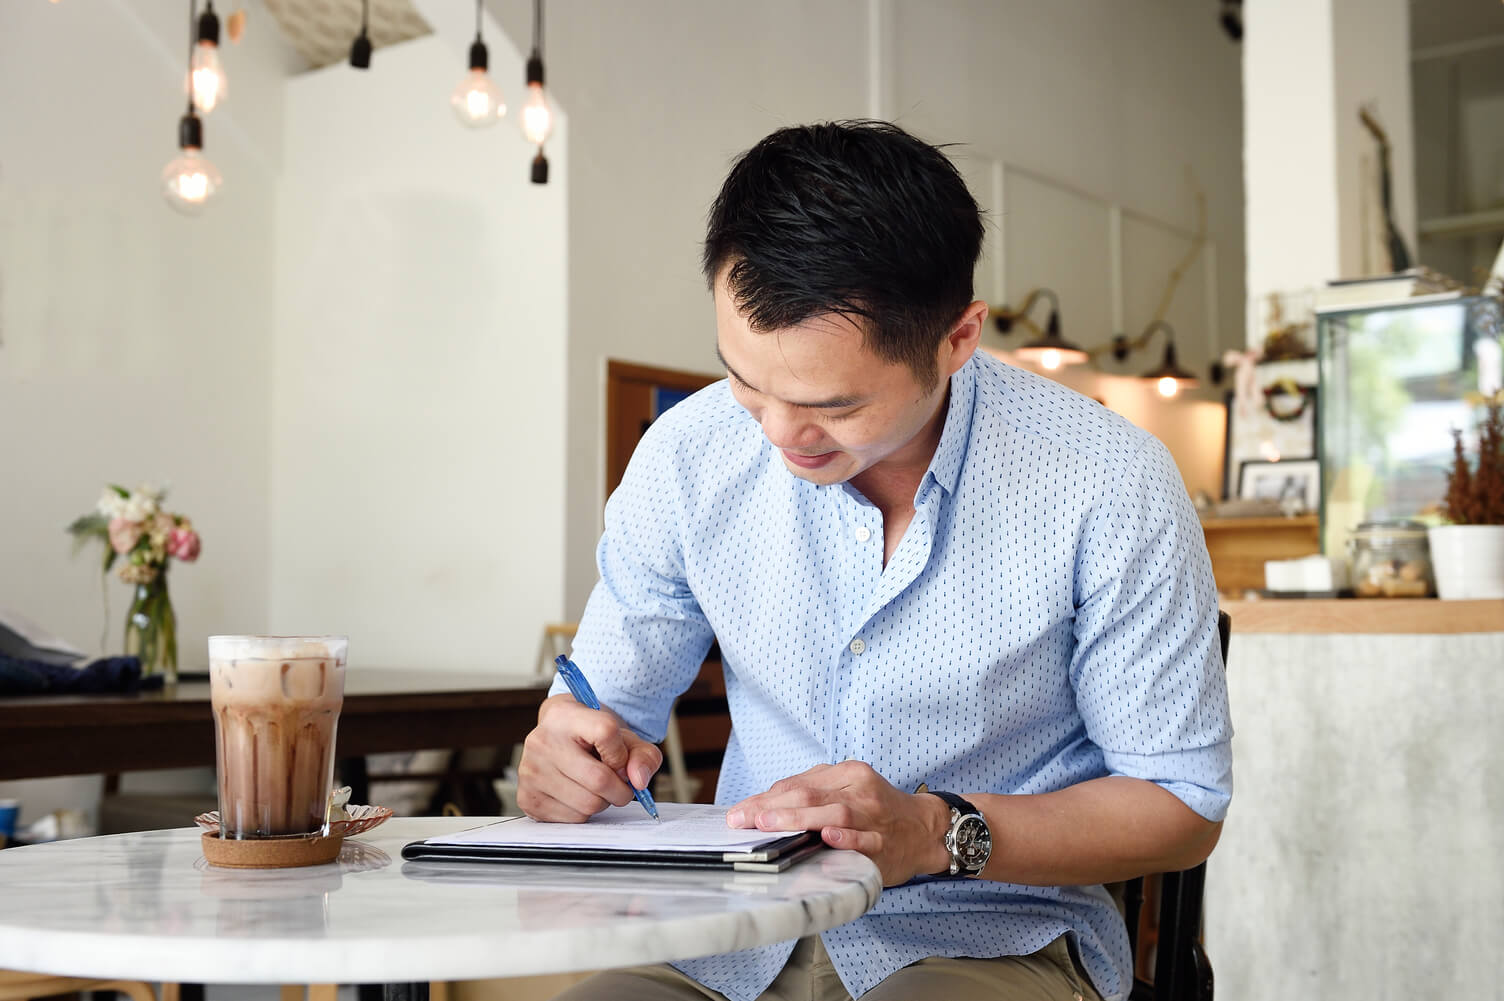 Man making notes in a coffee shop